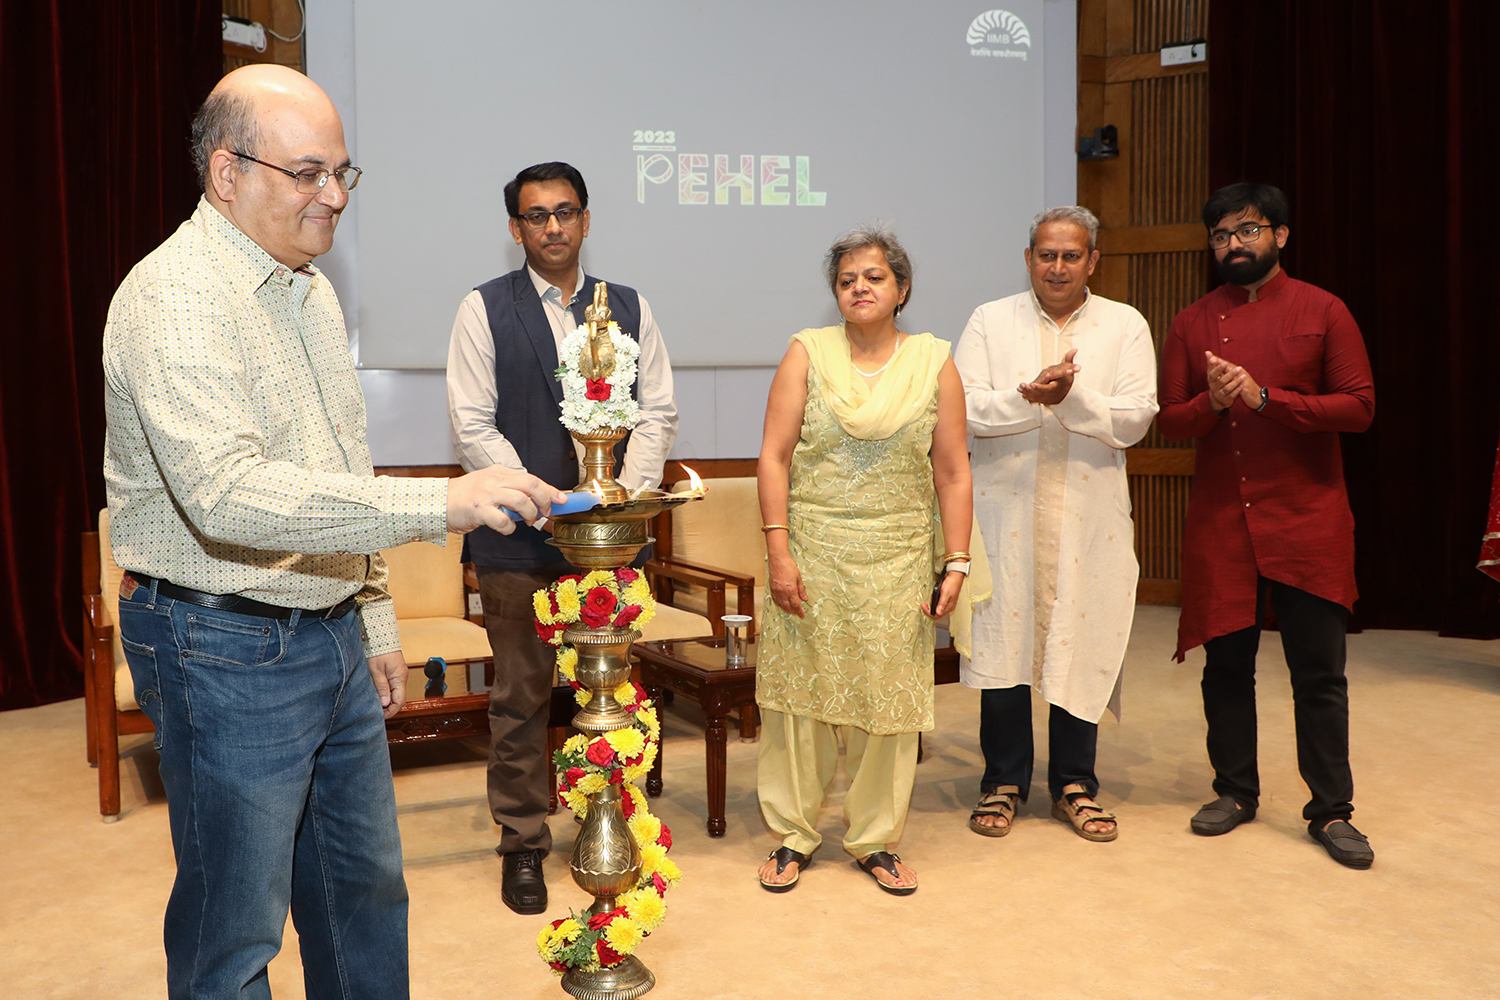 Prof. Rishikesha T Krishnan, Director, IIM Bangalore, inaugurates Pehel 2023, the annual cultural fest organized by students of IIM Bangalore’s two-year MBA for working professionals – the Post Graduate Programme in Enterprise Management (PGPEM), on 28th May 2023.